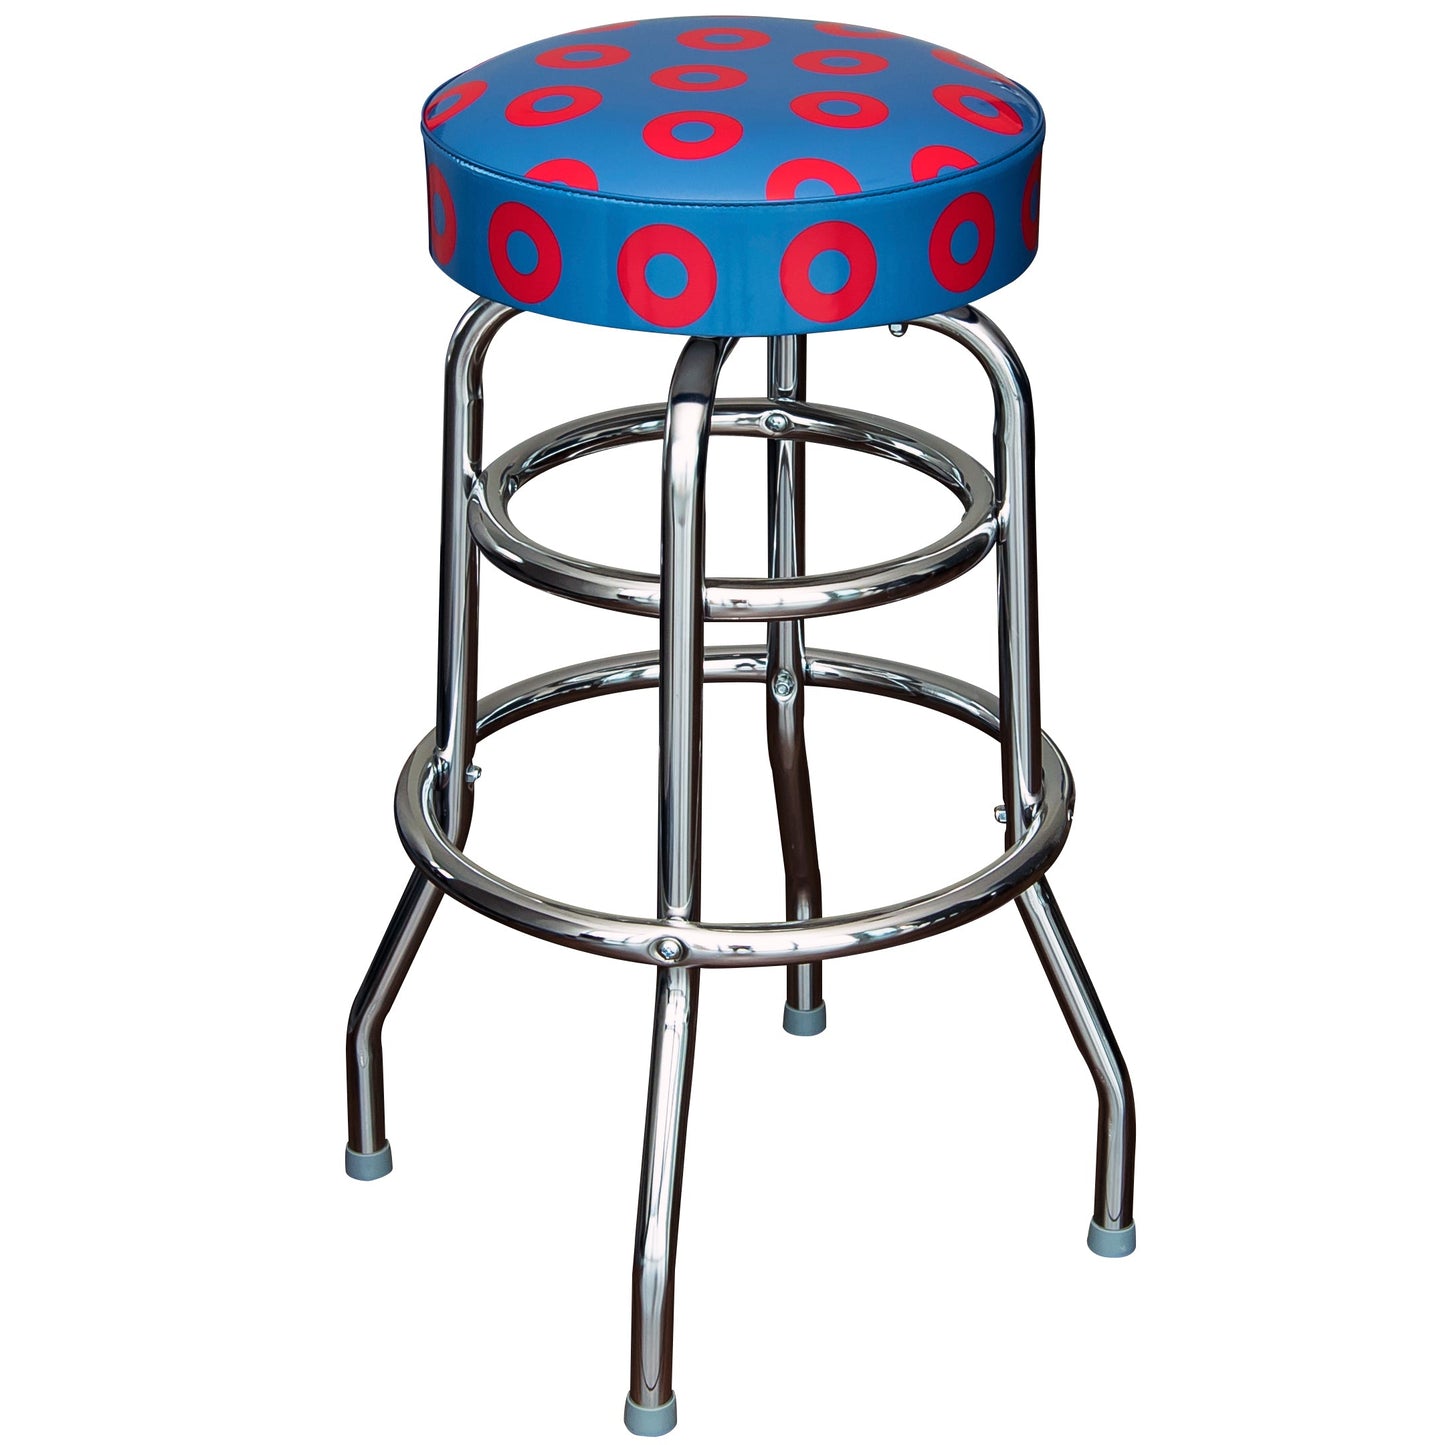 Donut Bar Stool - Blue with Red Donuts